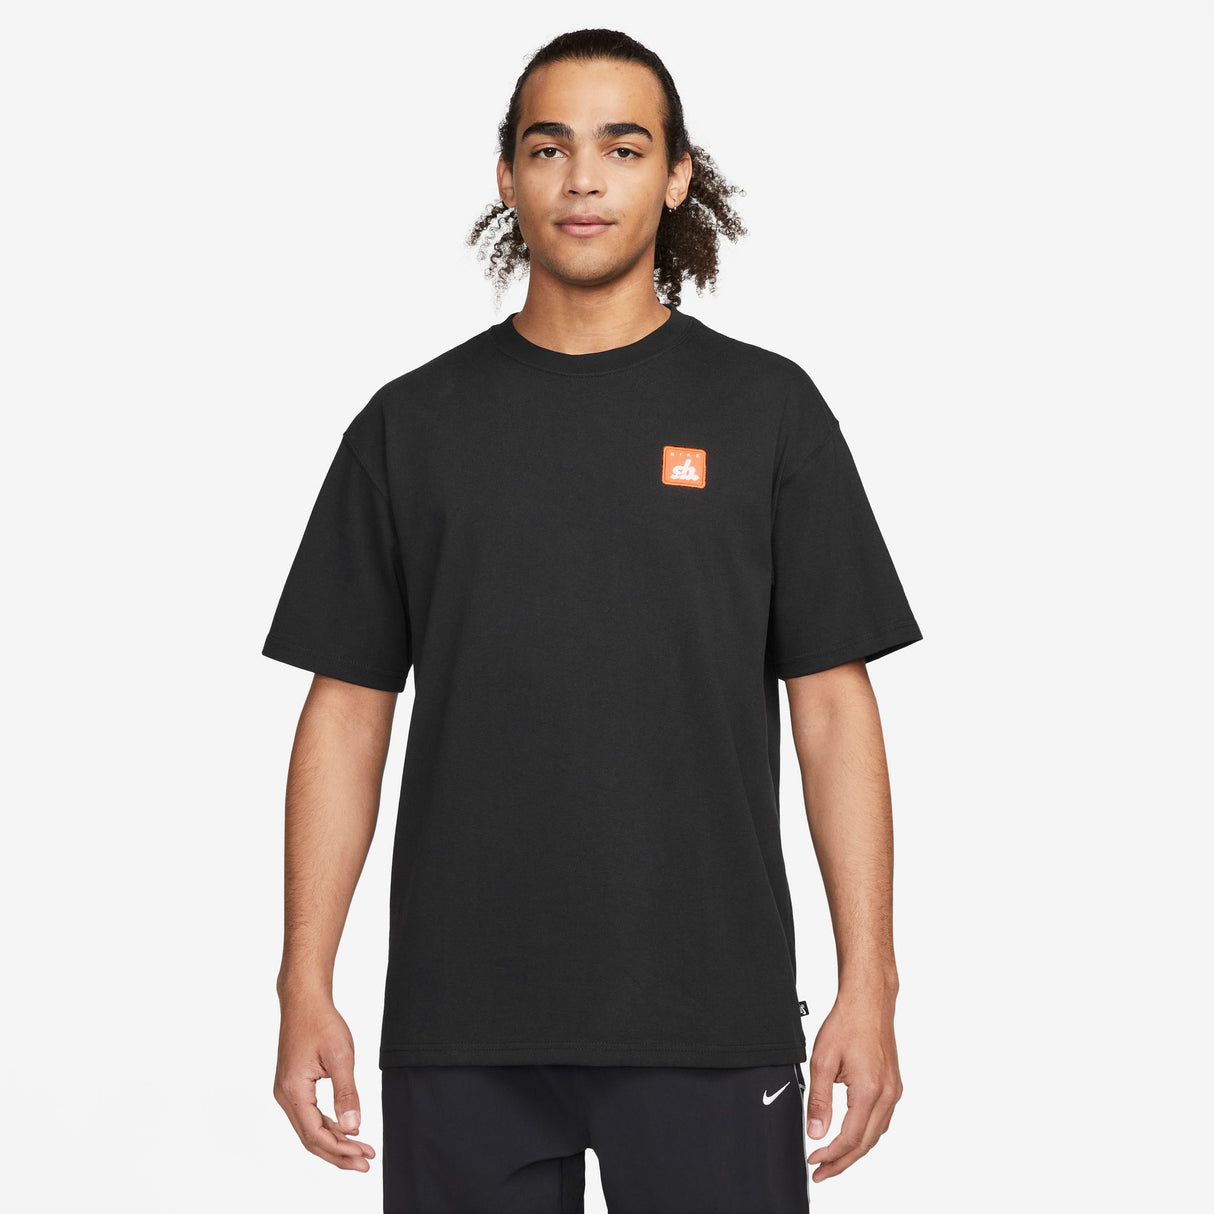 Nike SB Embroidered Patch Black S/s Shirt